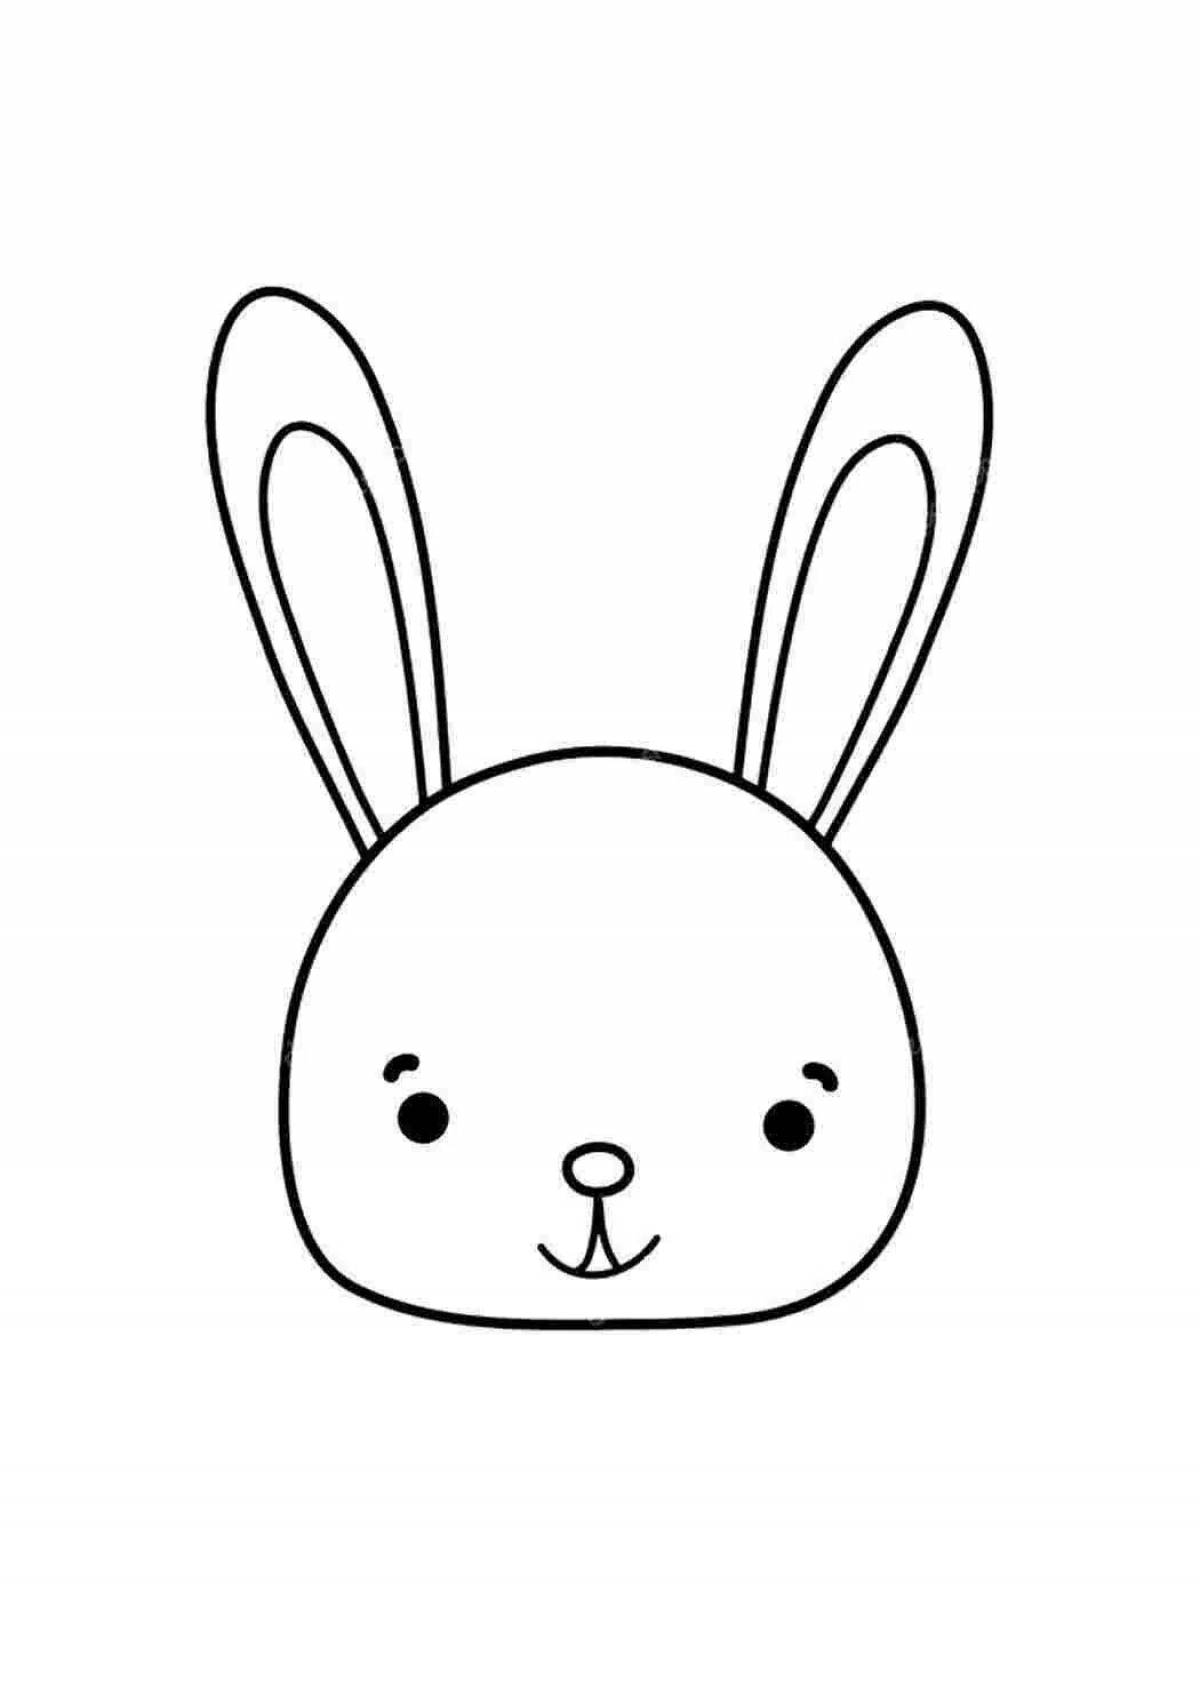 Exquisite hare head coloring page